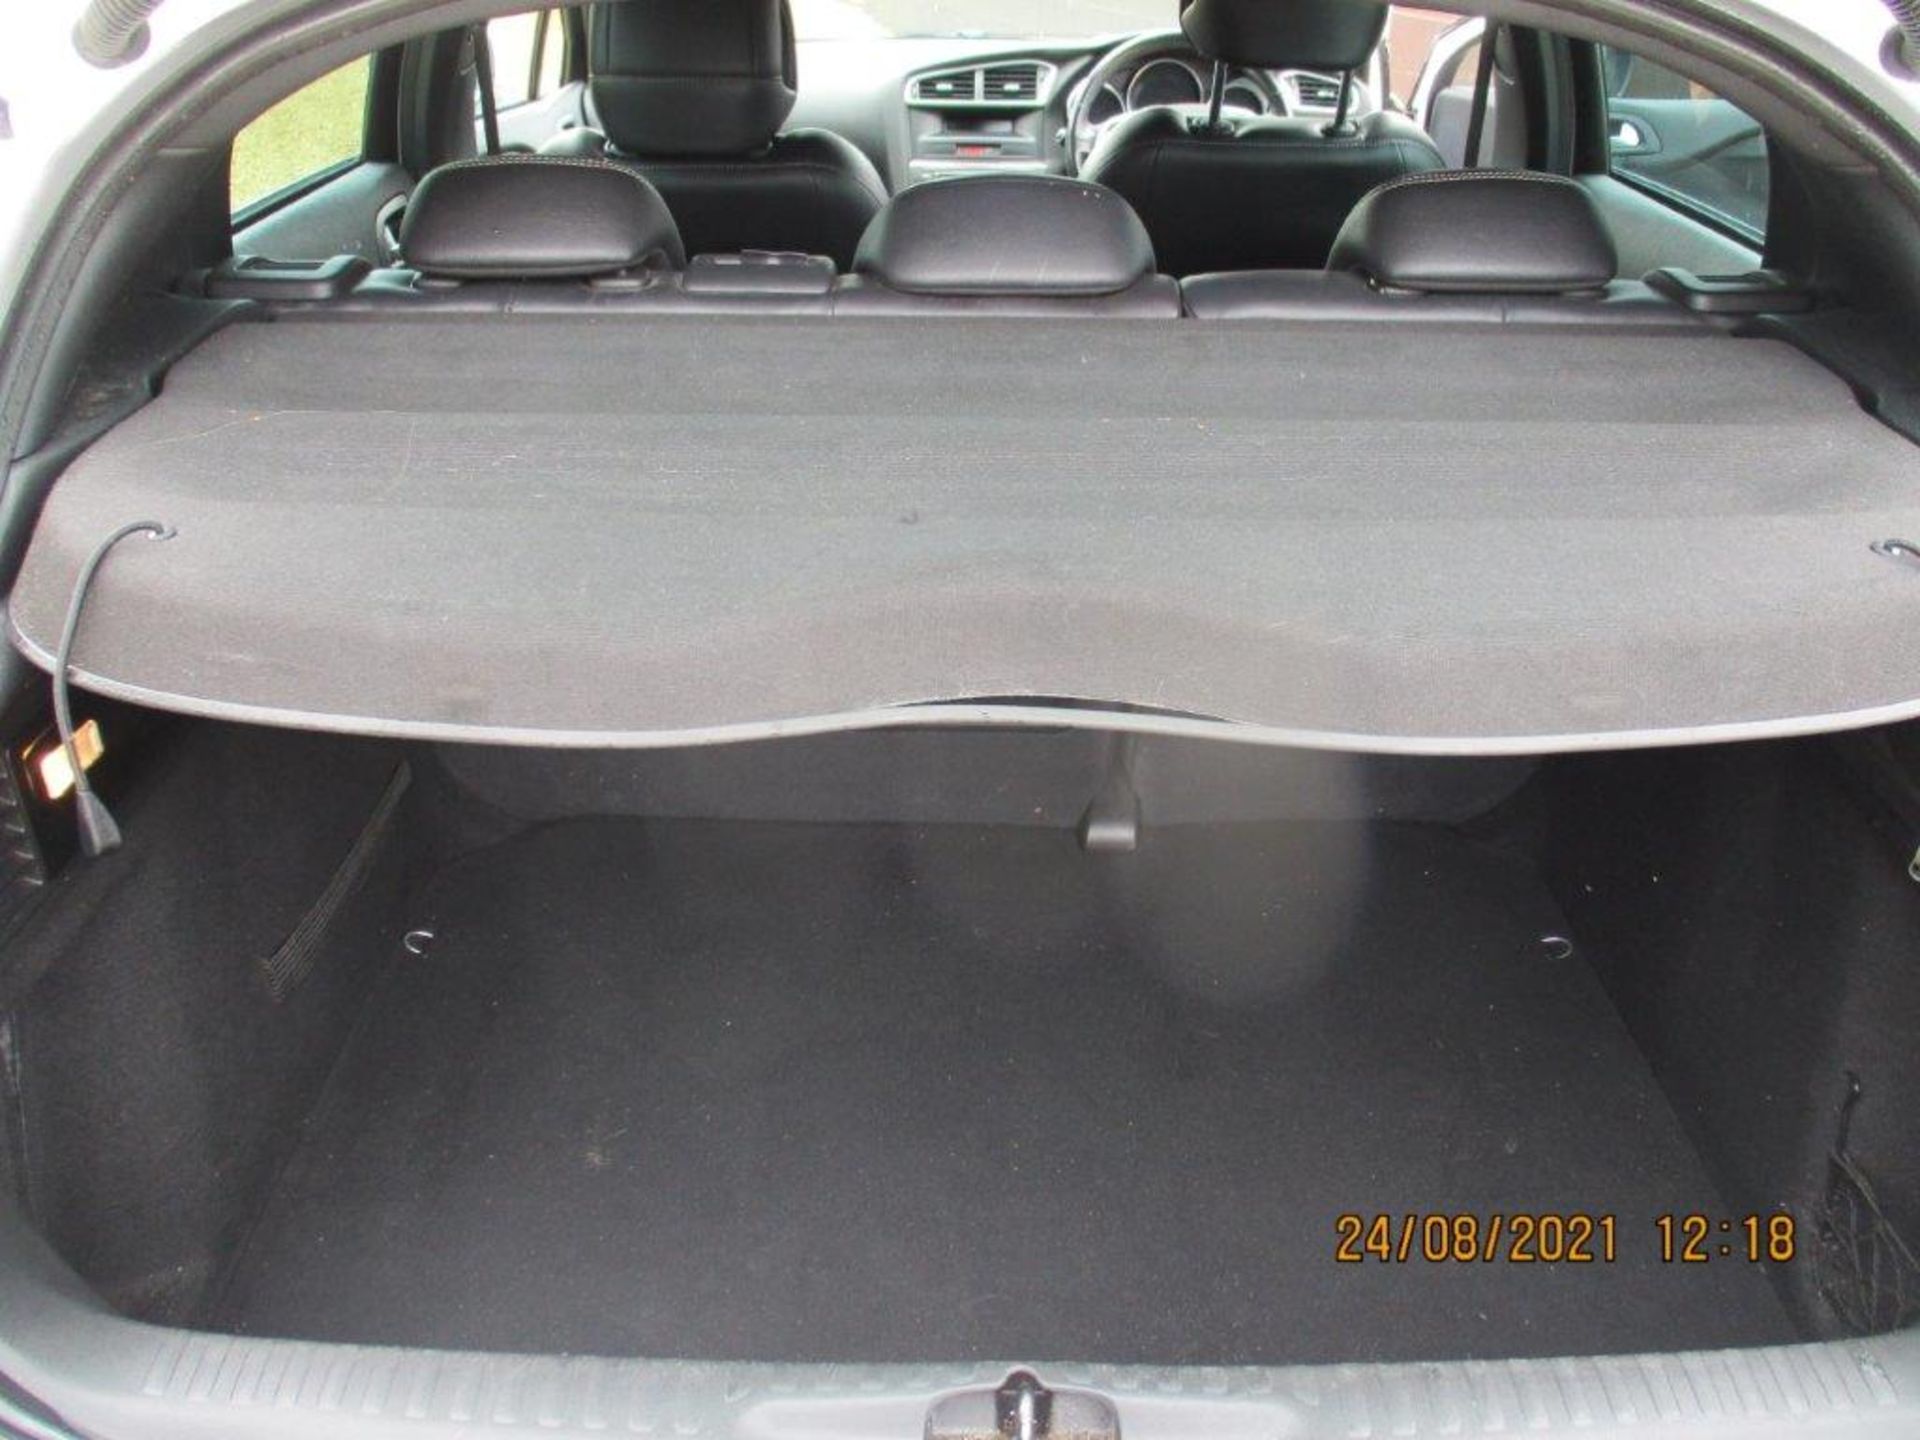 13 13 Citroen DS4 Style HDI 5dr - Image 19 of 21